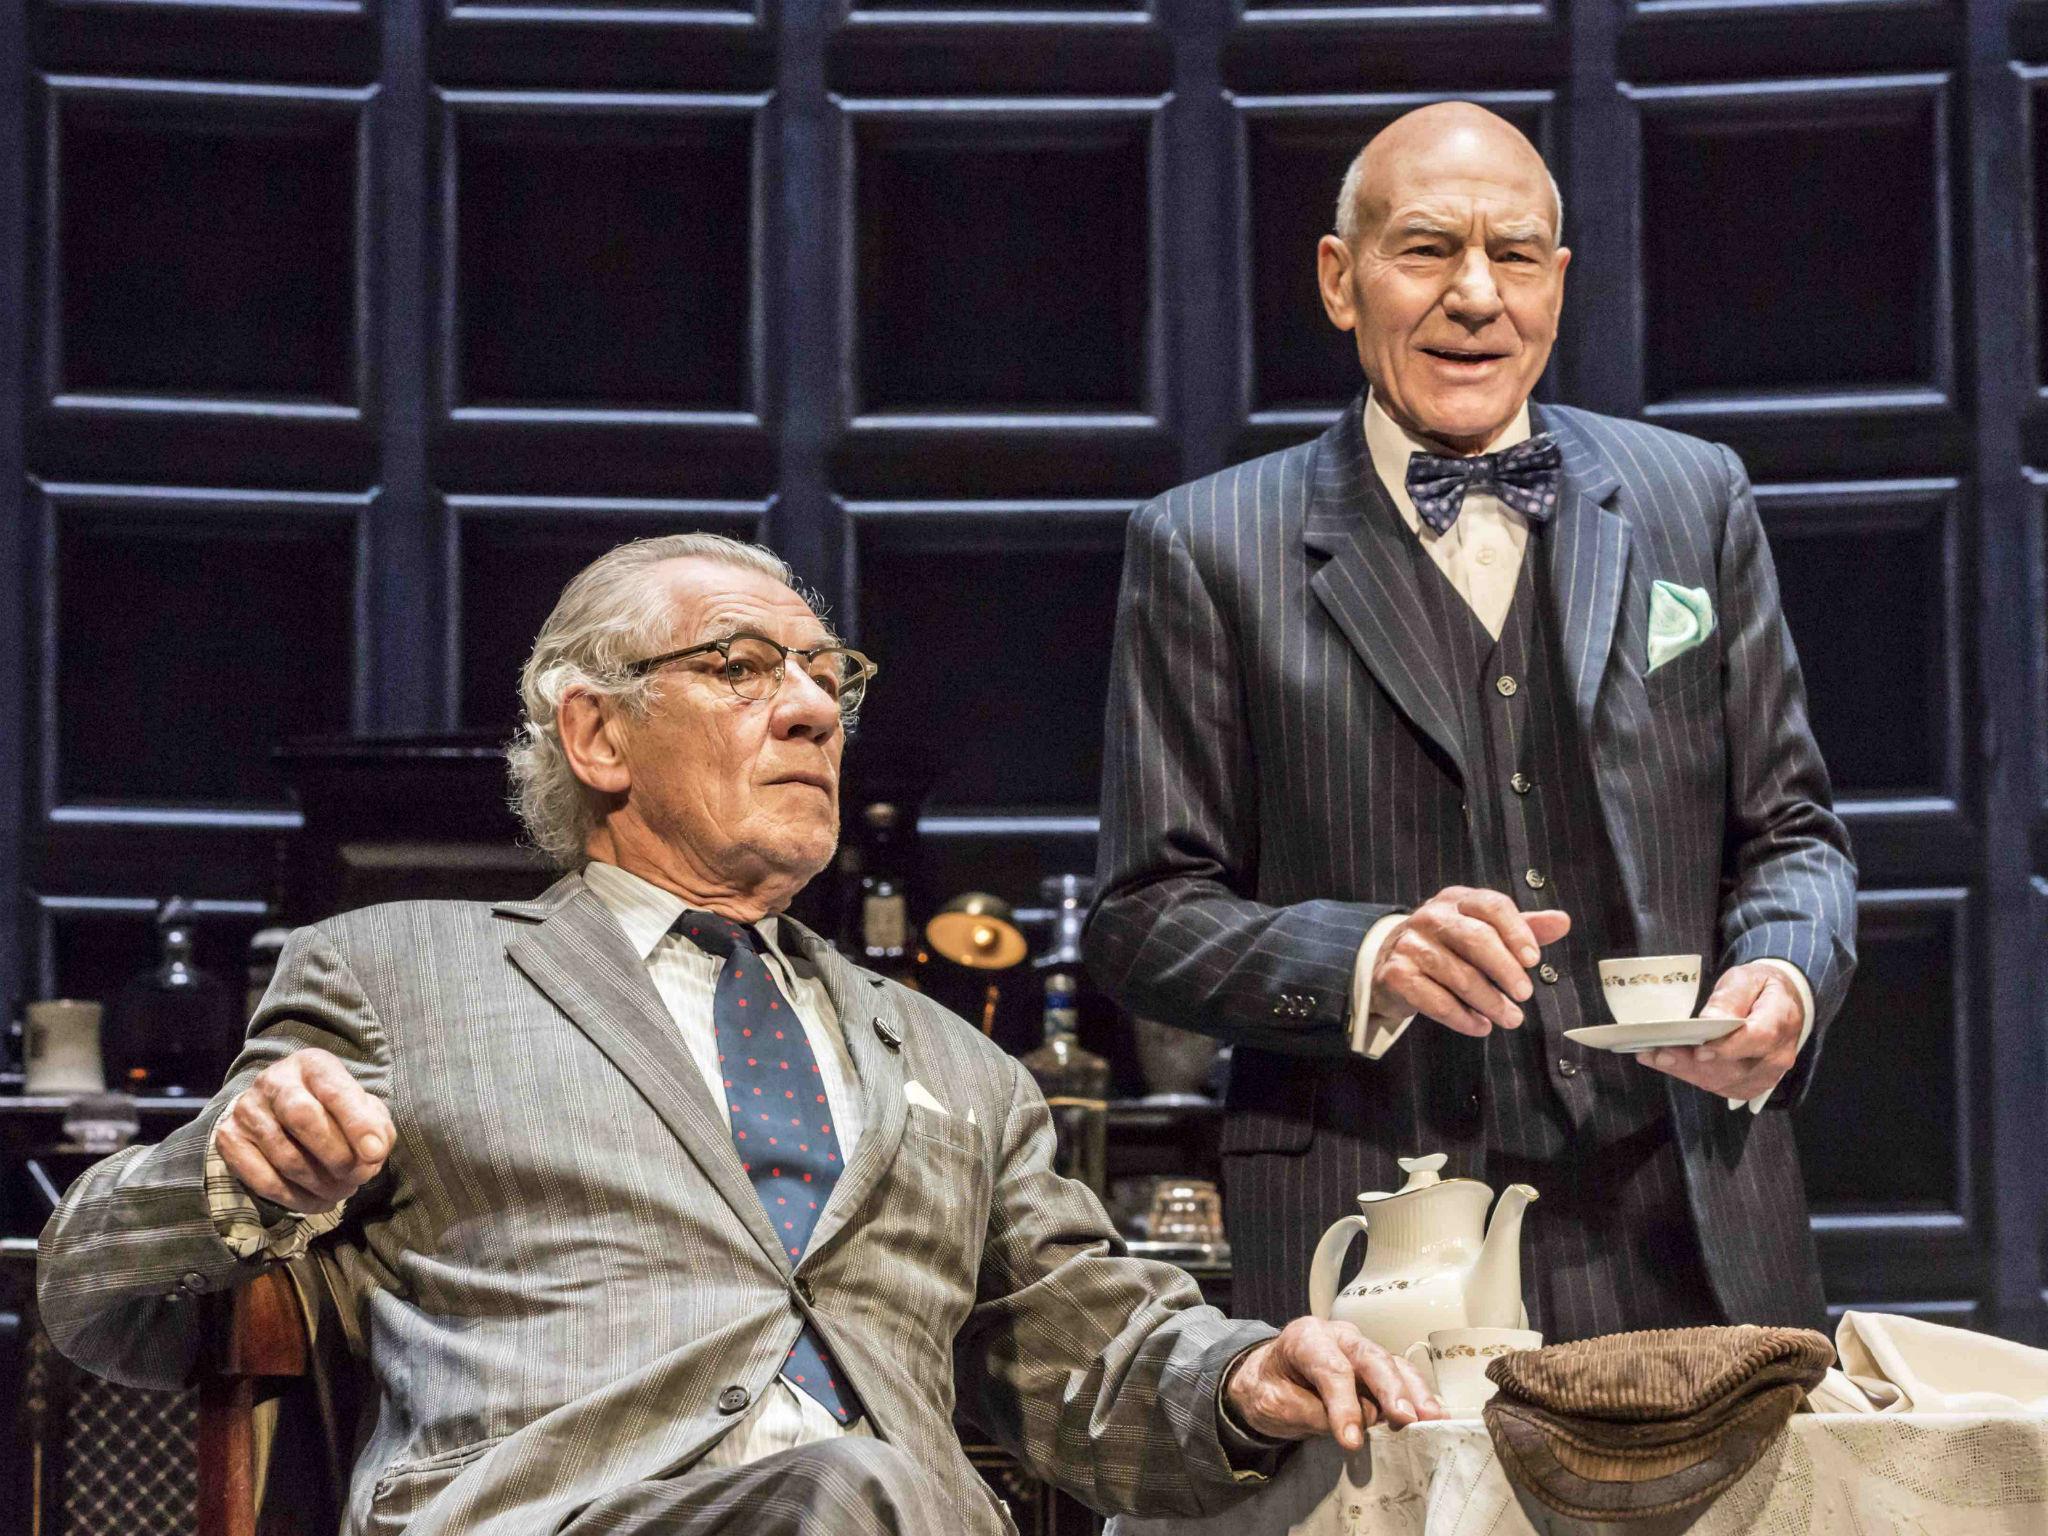 Ian McKellan as Spooner and Patrick Stewart as Hirst in ‘No Man's Land’ at Wyndham's Theatre, which will be screened in cinemas